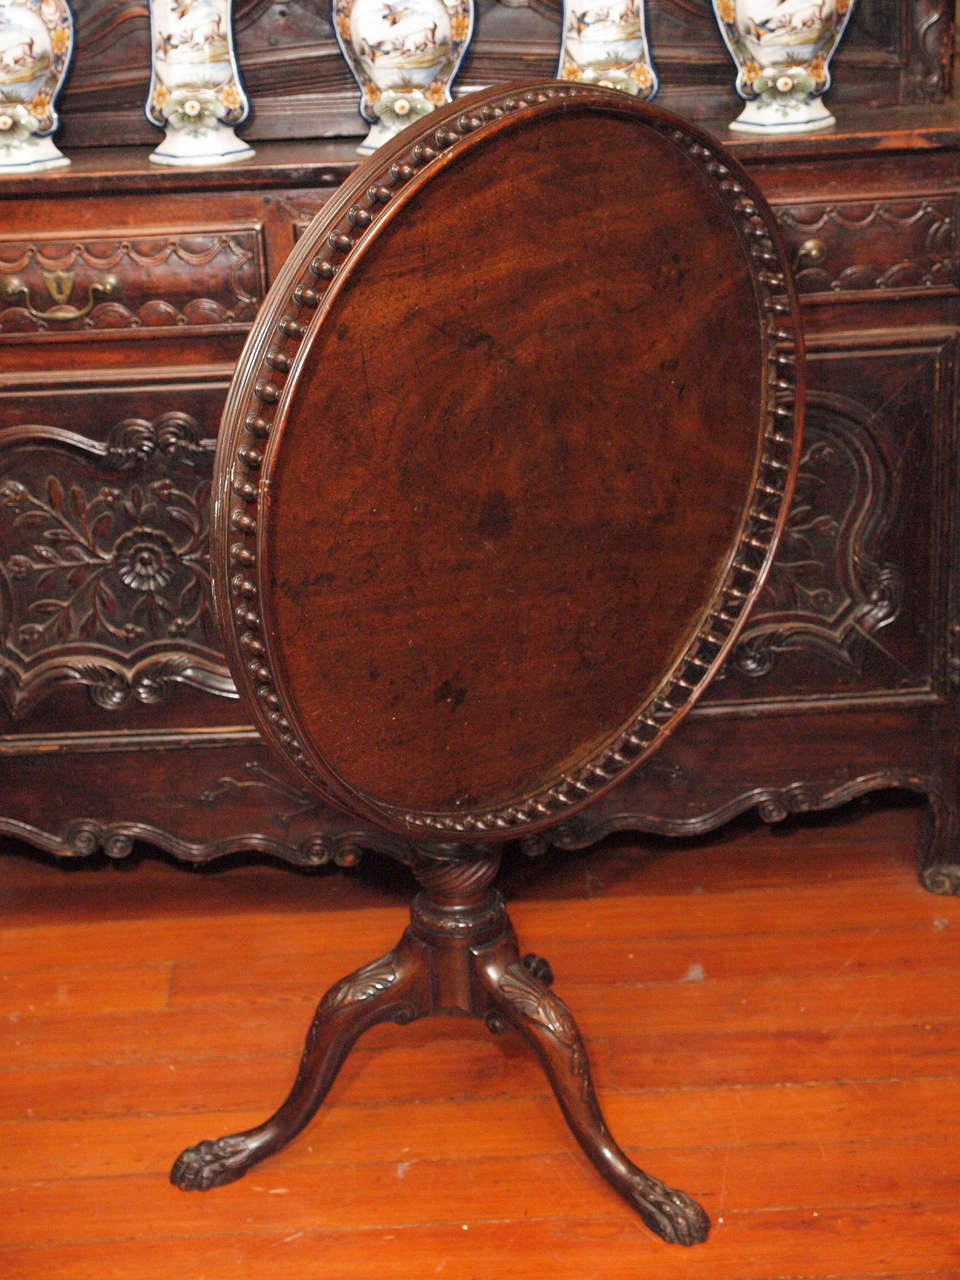 English George III Galleried Mahogany Tilt top Table with trifed base and balustraded gallery.